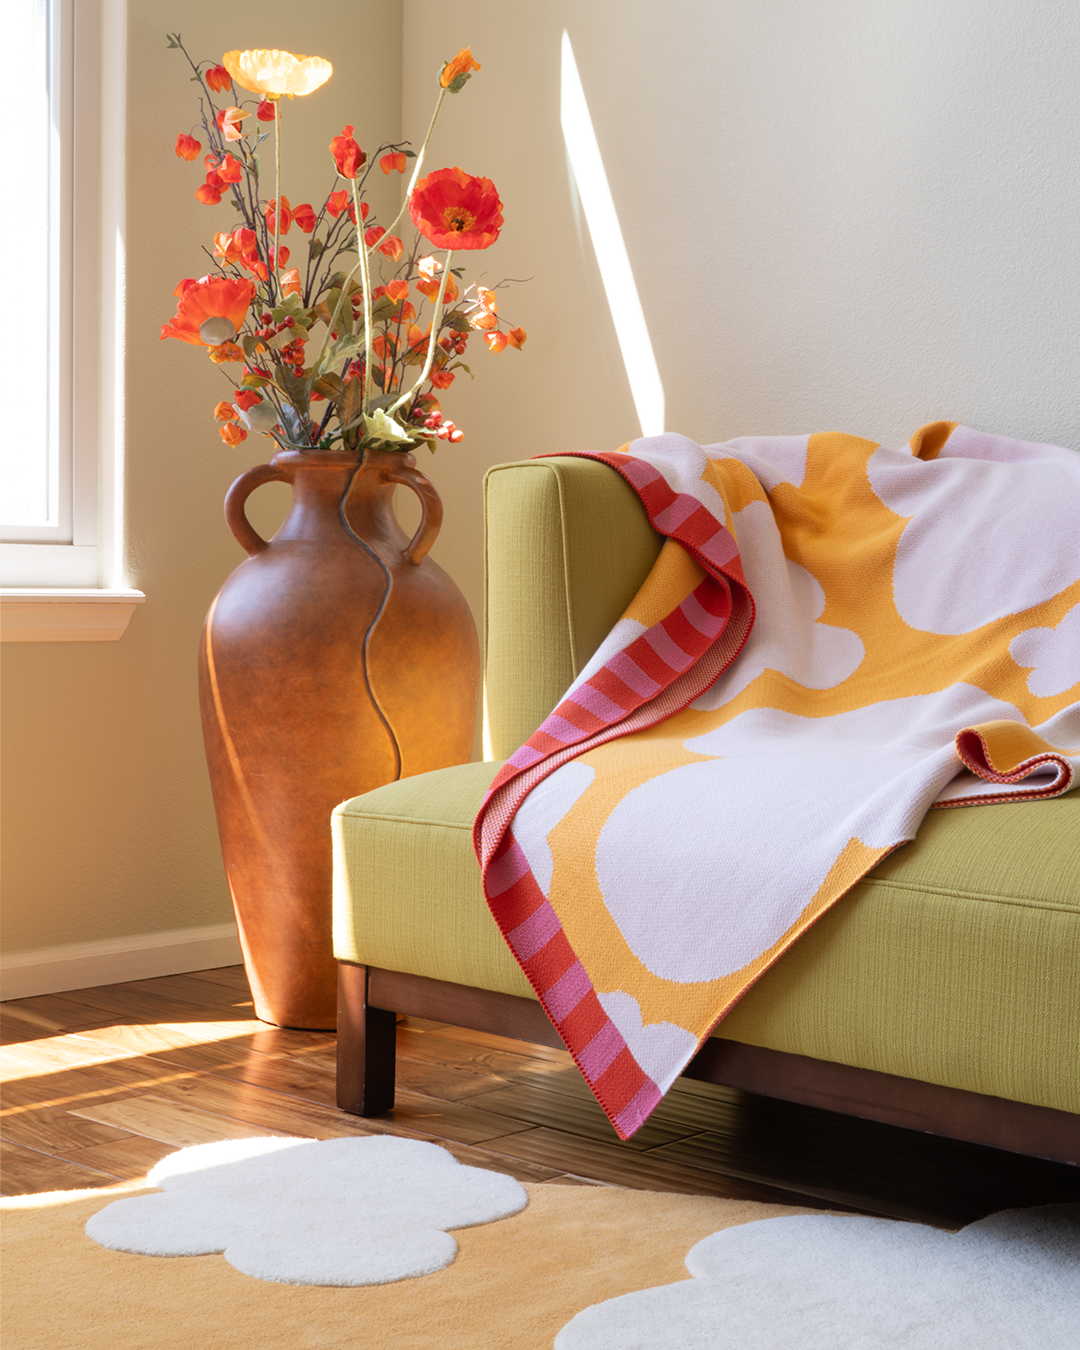 Yellow blanket with beige clouds and a border that is striped pink and orange. The blanket is sitting on a couch in a living room with a yellow cloud rug on the floor and a large vase with flowers on the floor.